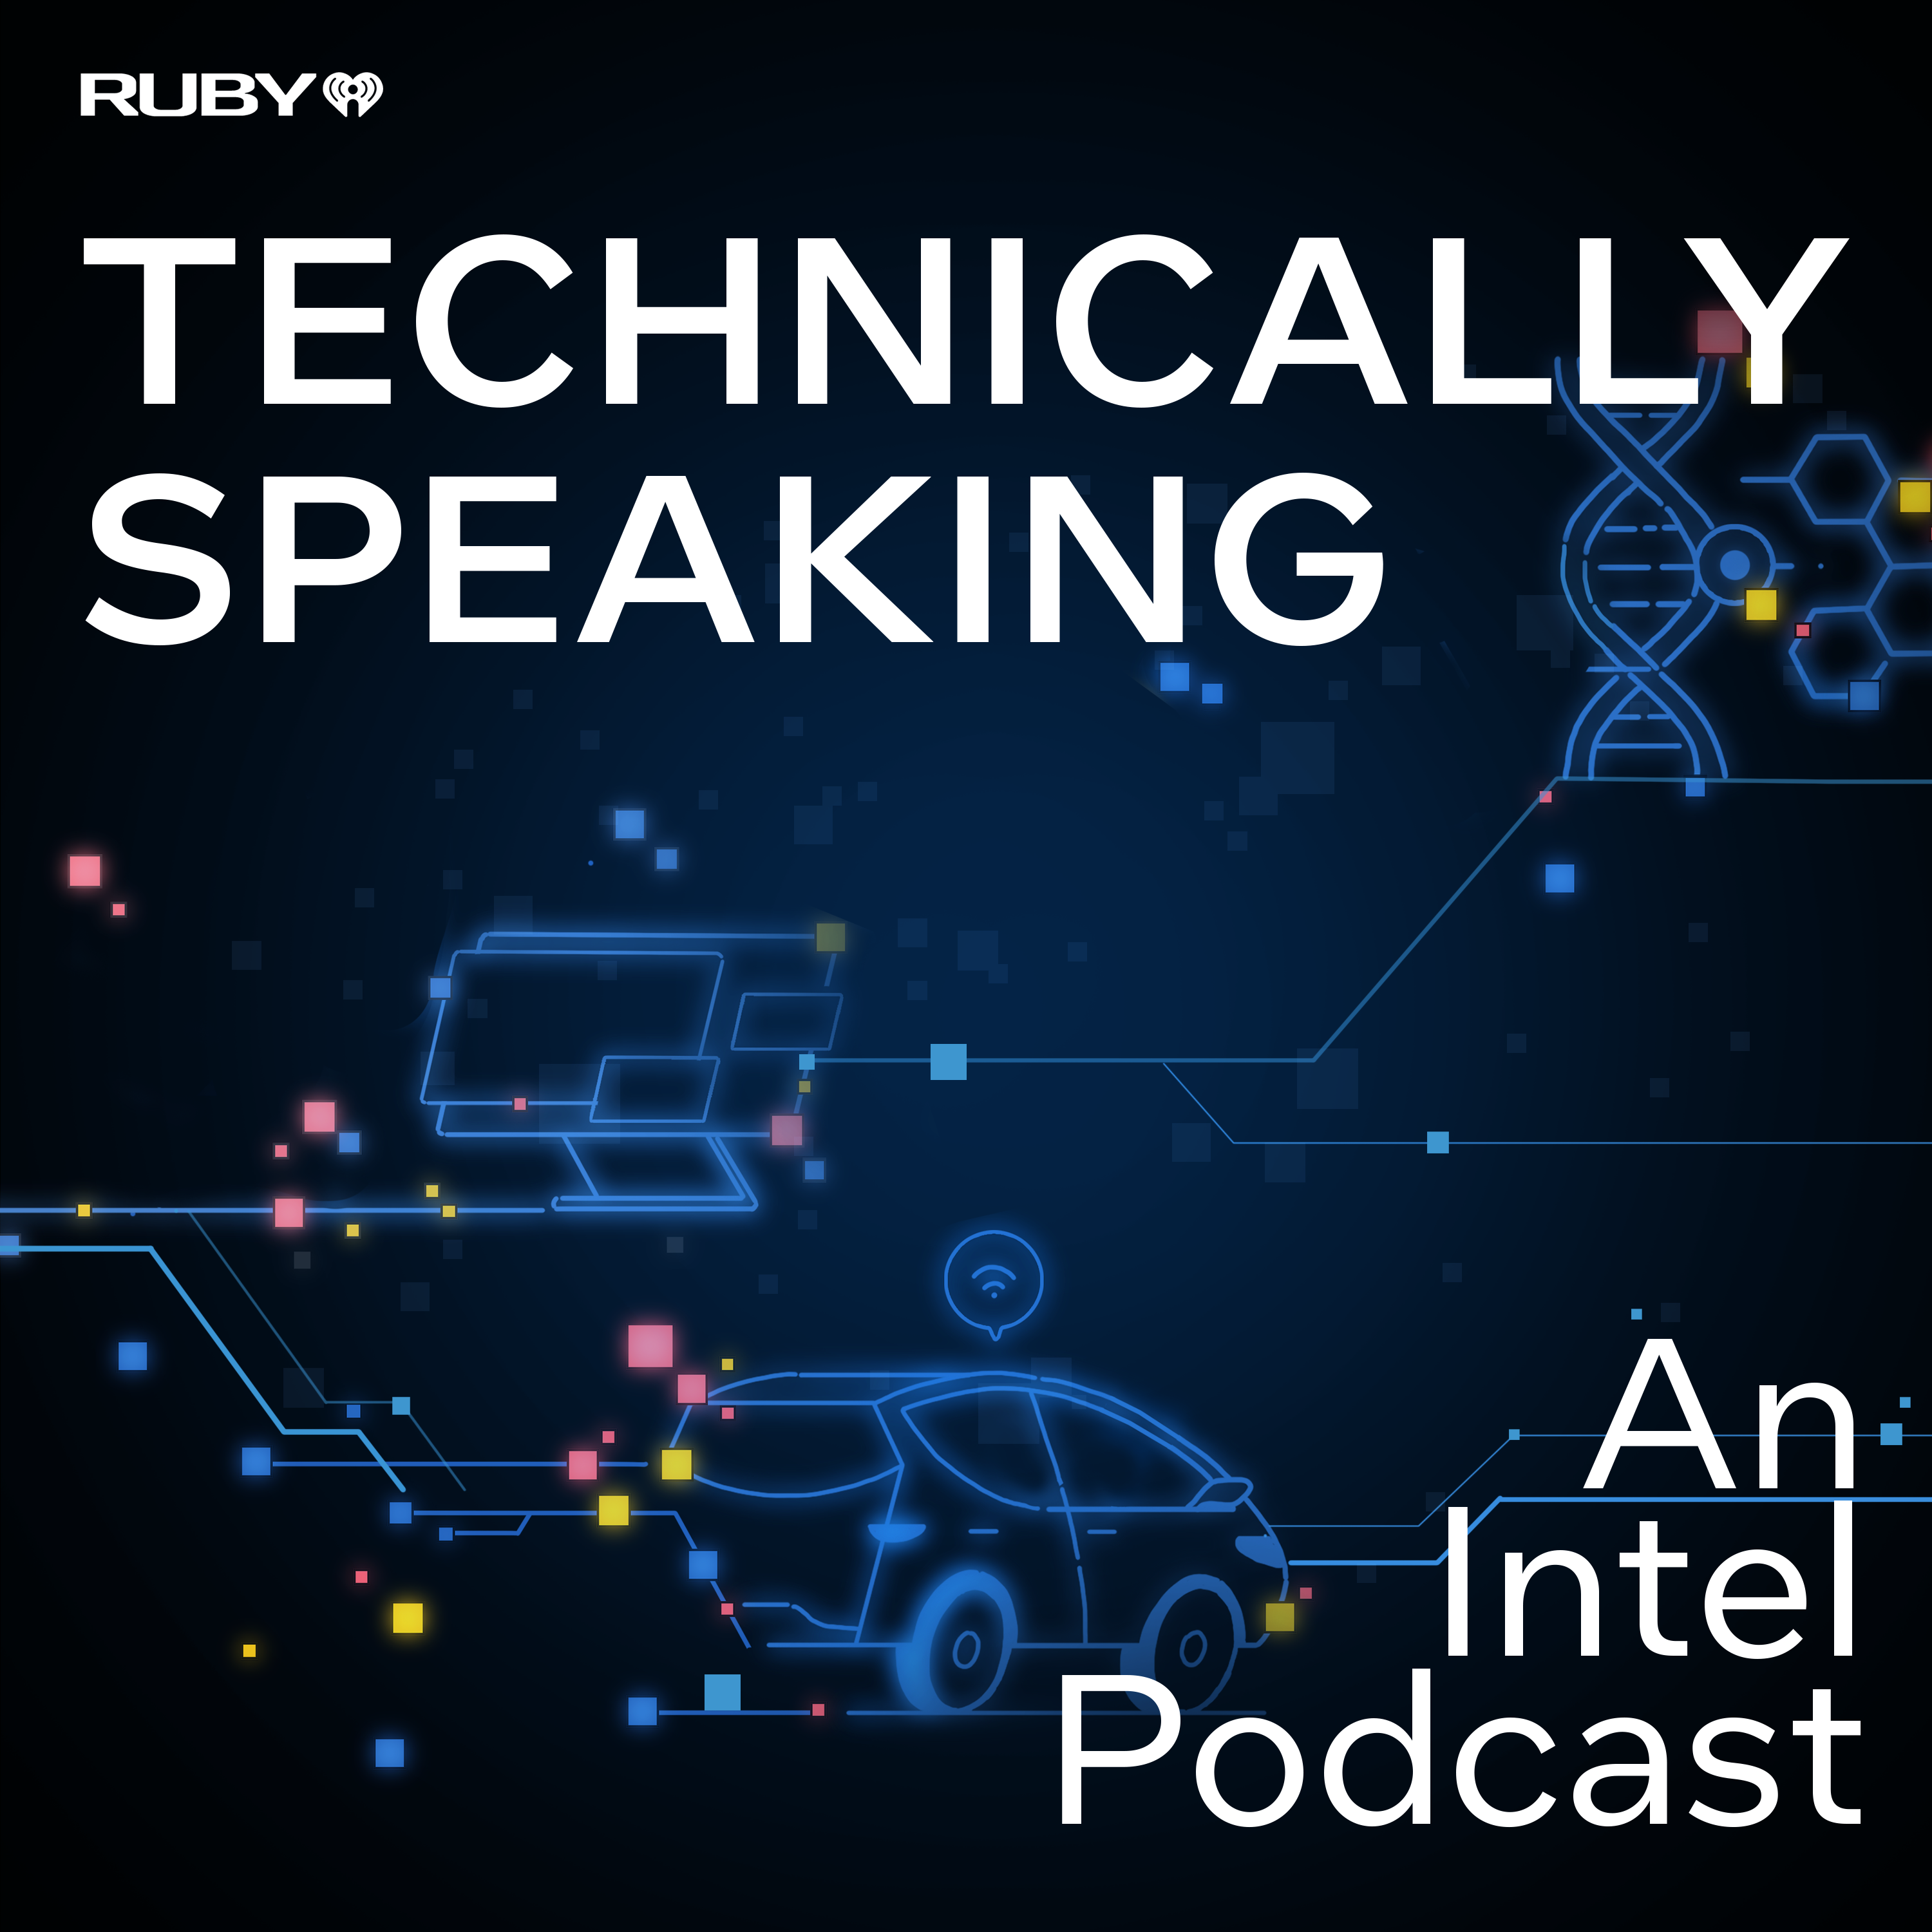 Technically Speaking: An Intel Podcast podcast show image